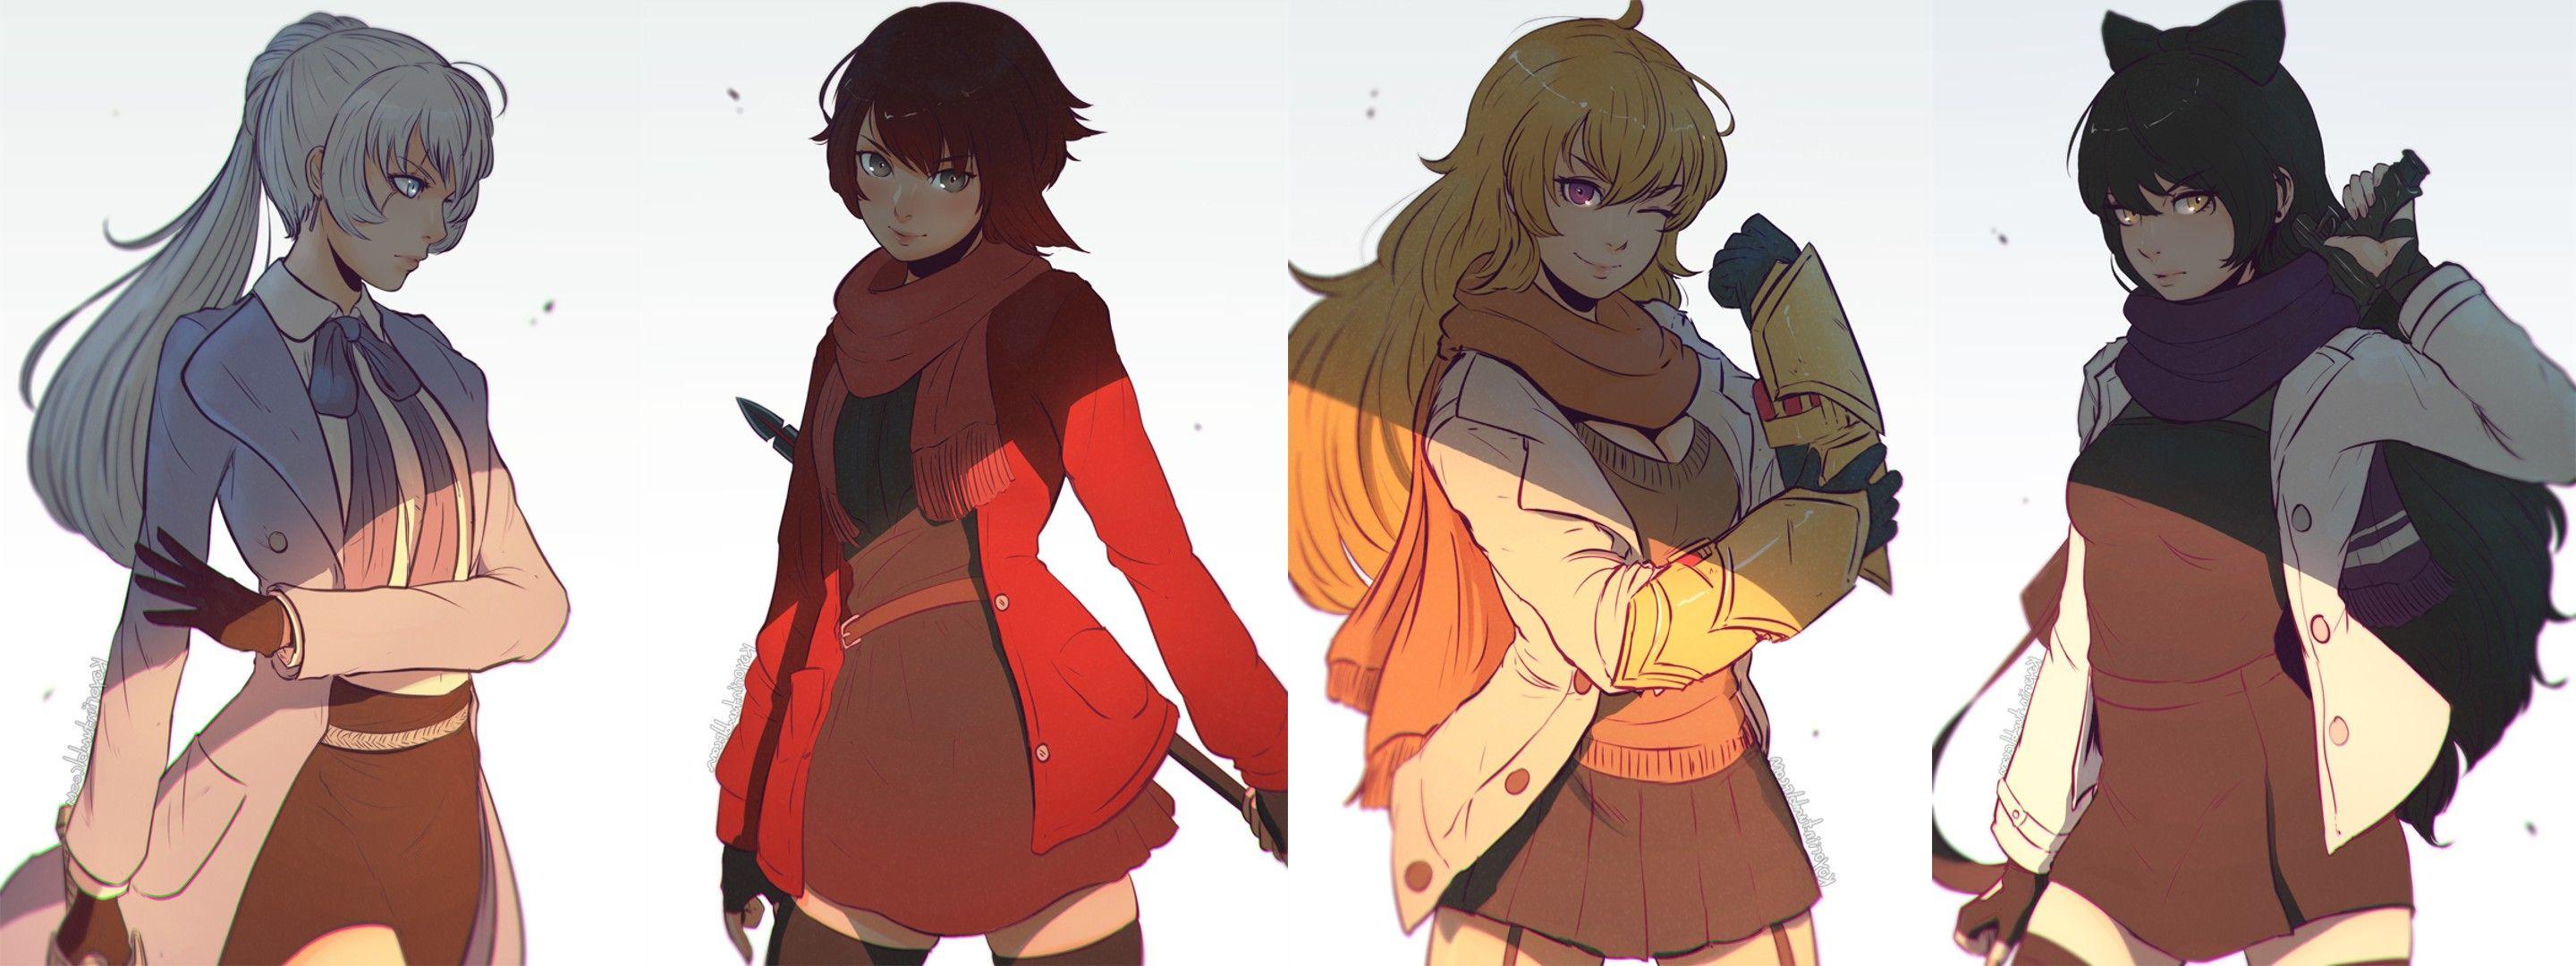 RWBY Yang wallpaperDownload free awesome full HD background